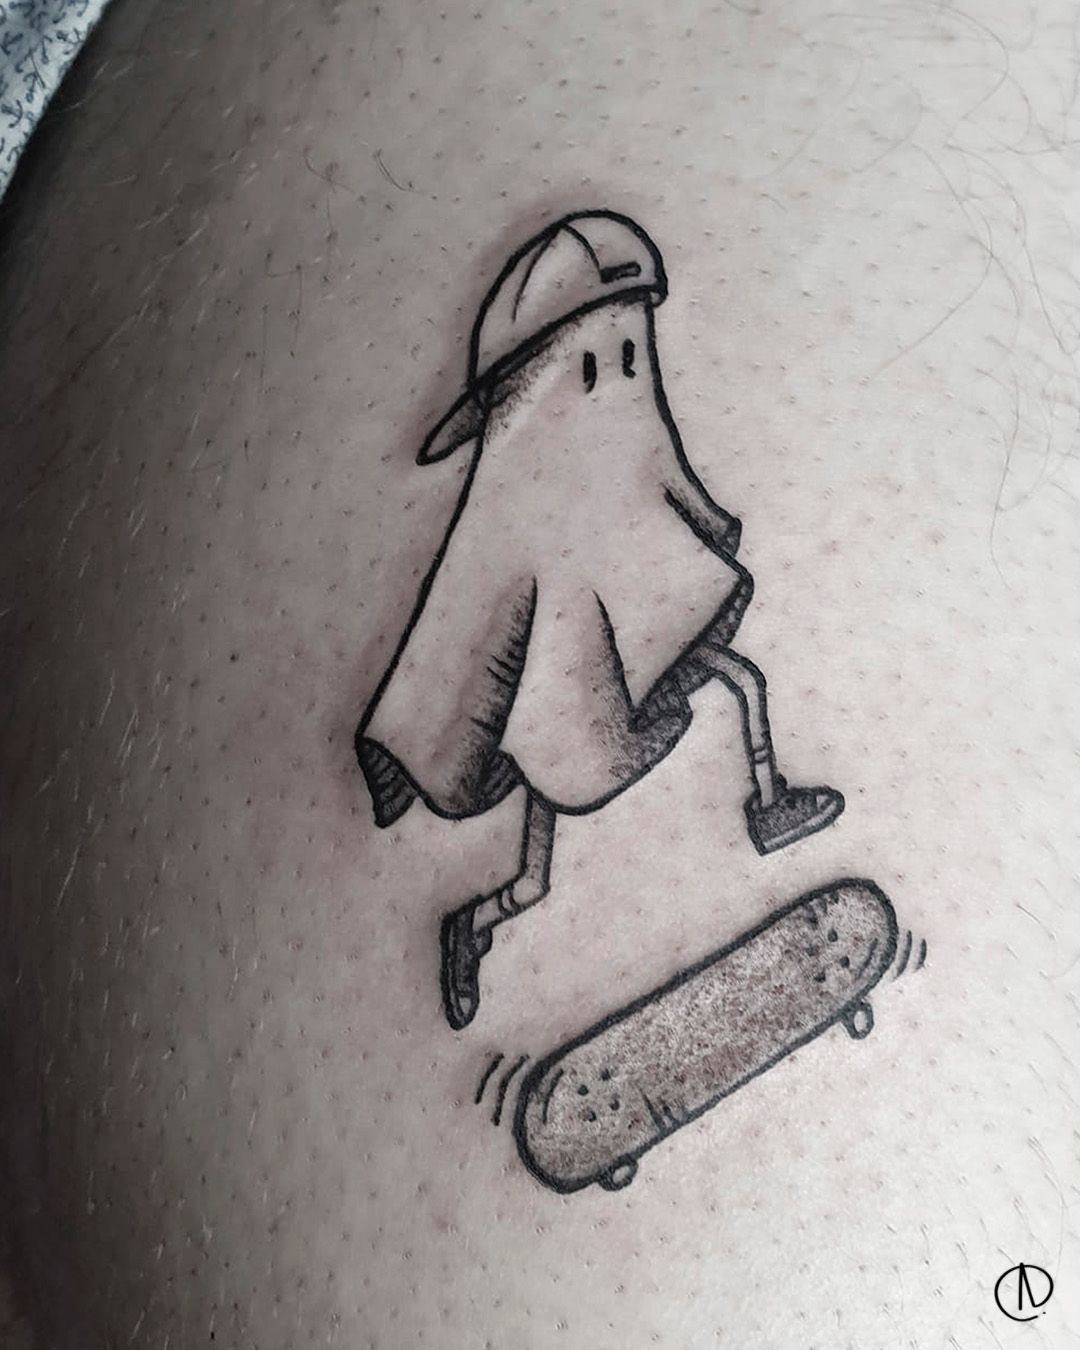 Skateboarding ghost for my bro Im am an aspiring tattoo artistmaybe hand  poke artist Any advice on how to get an apprenticeship  rsticknpokes